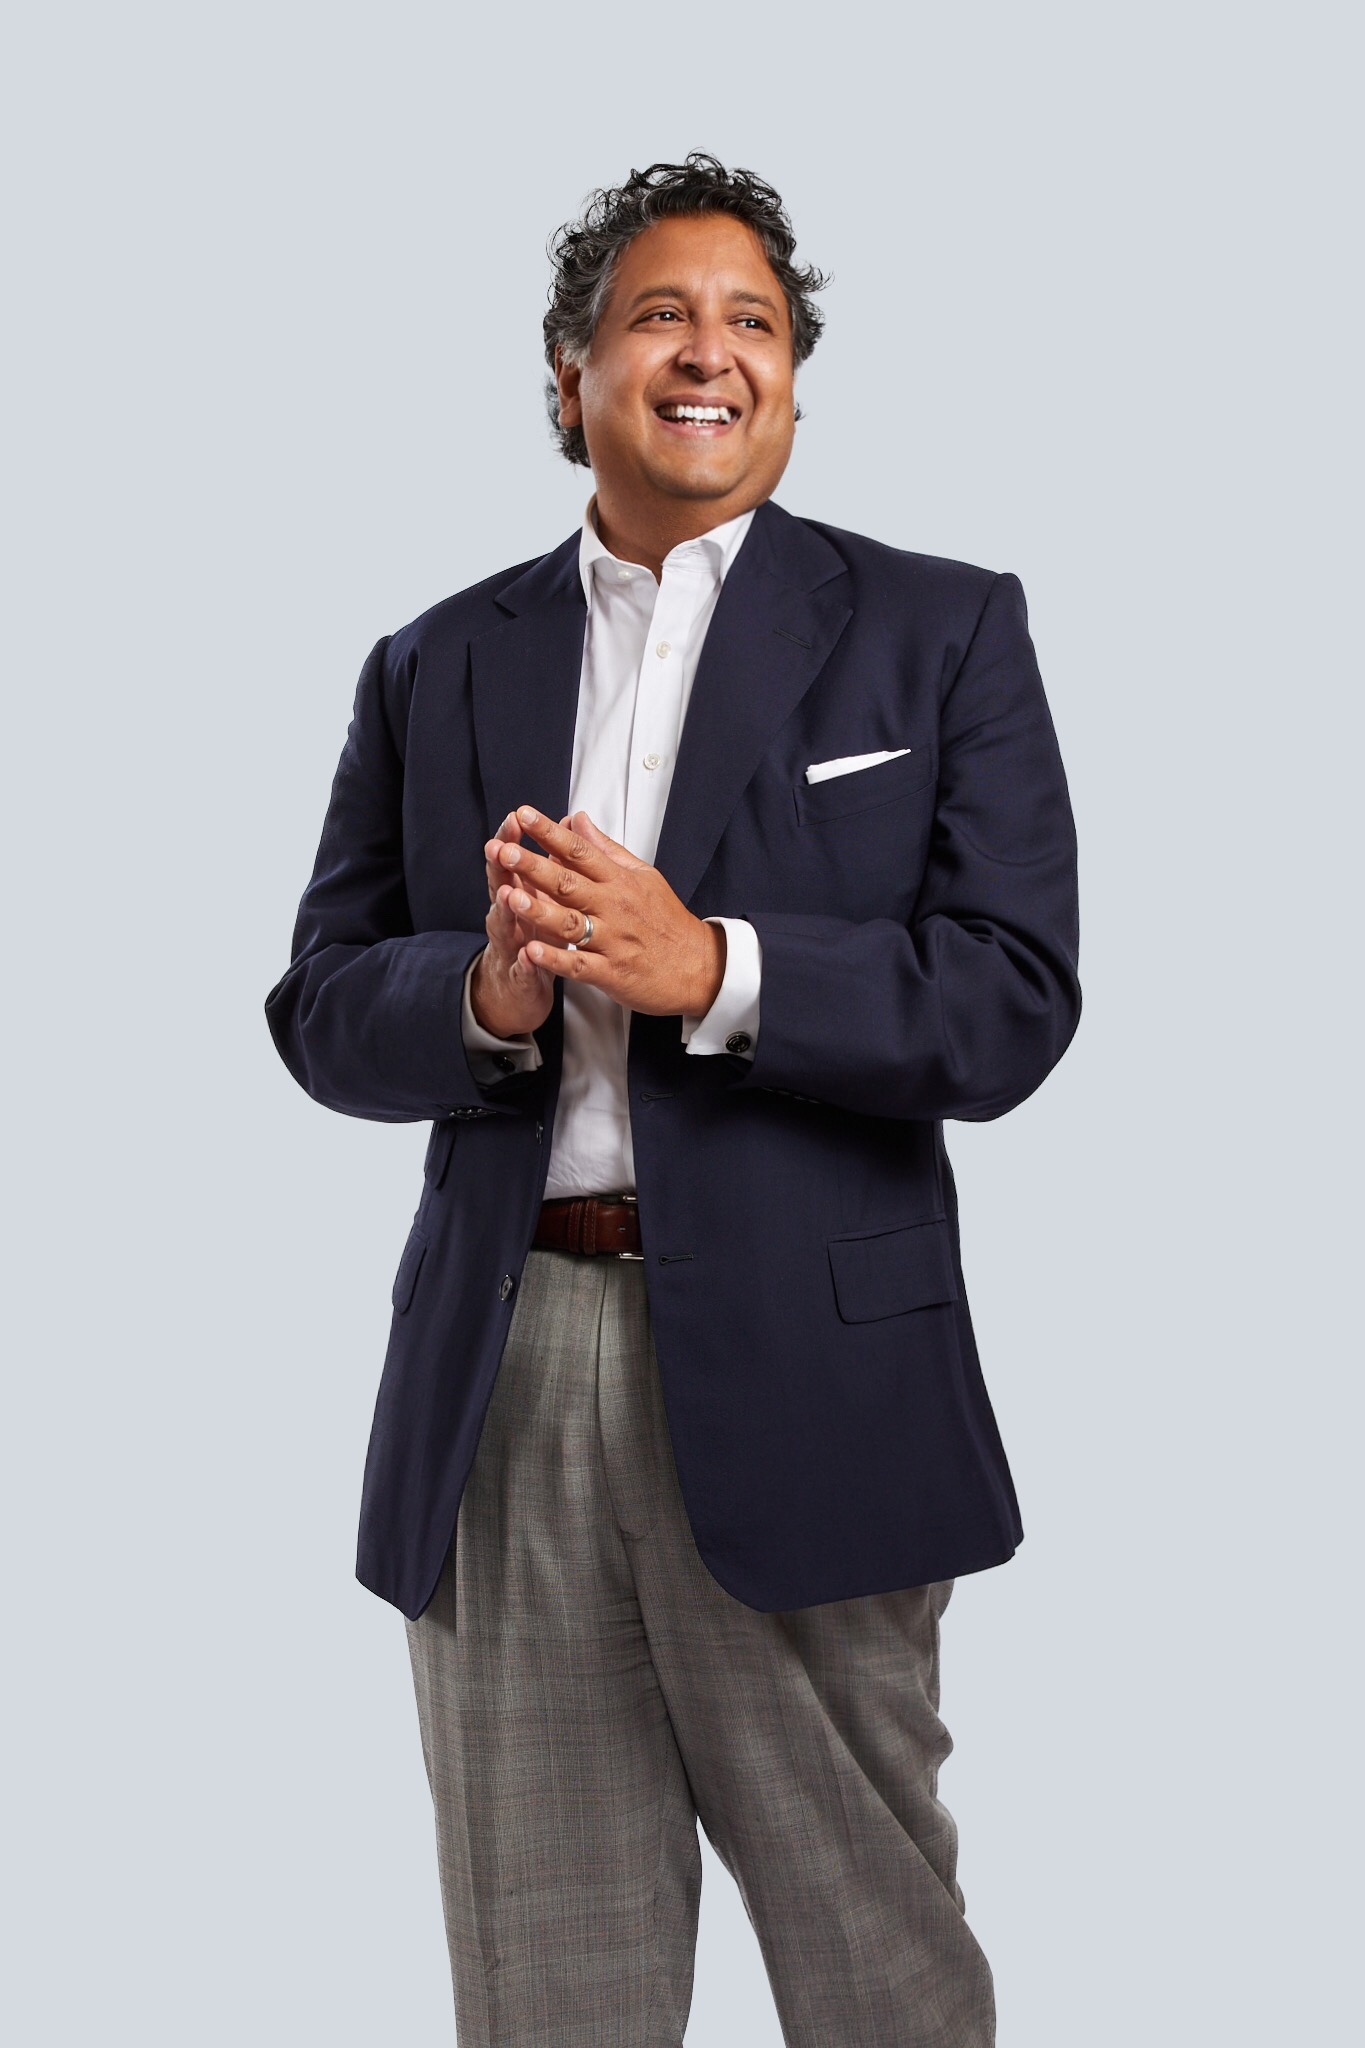 Sandeep is a Co-Founder and Chief Executive Officer. Exo is his fourth startup organization. 